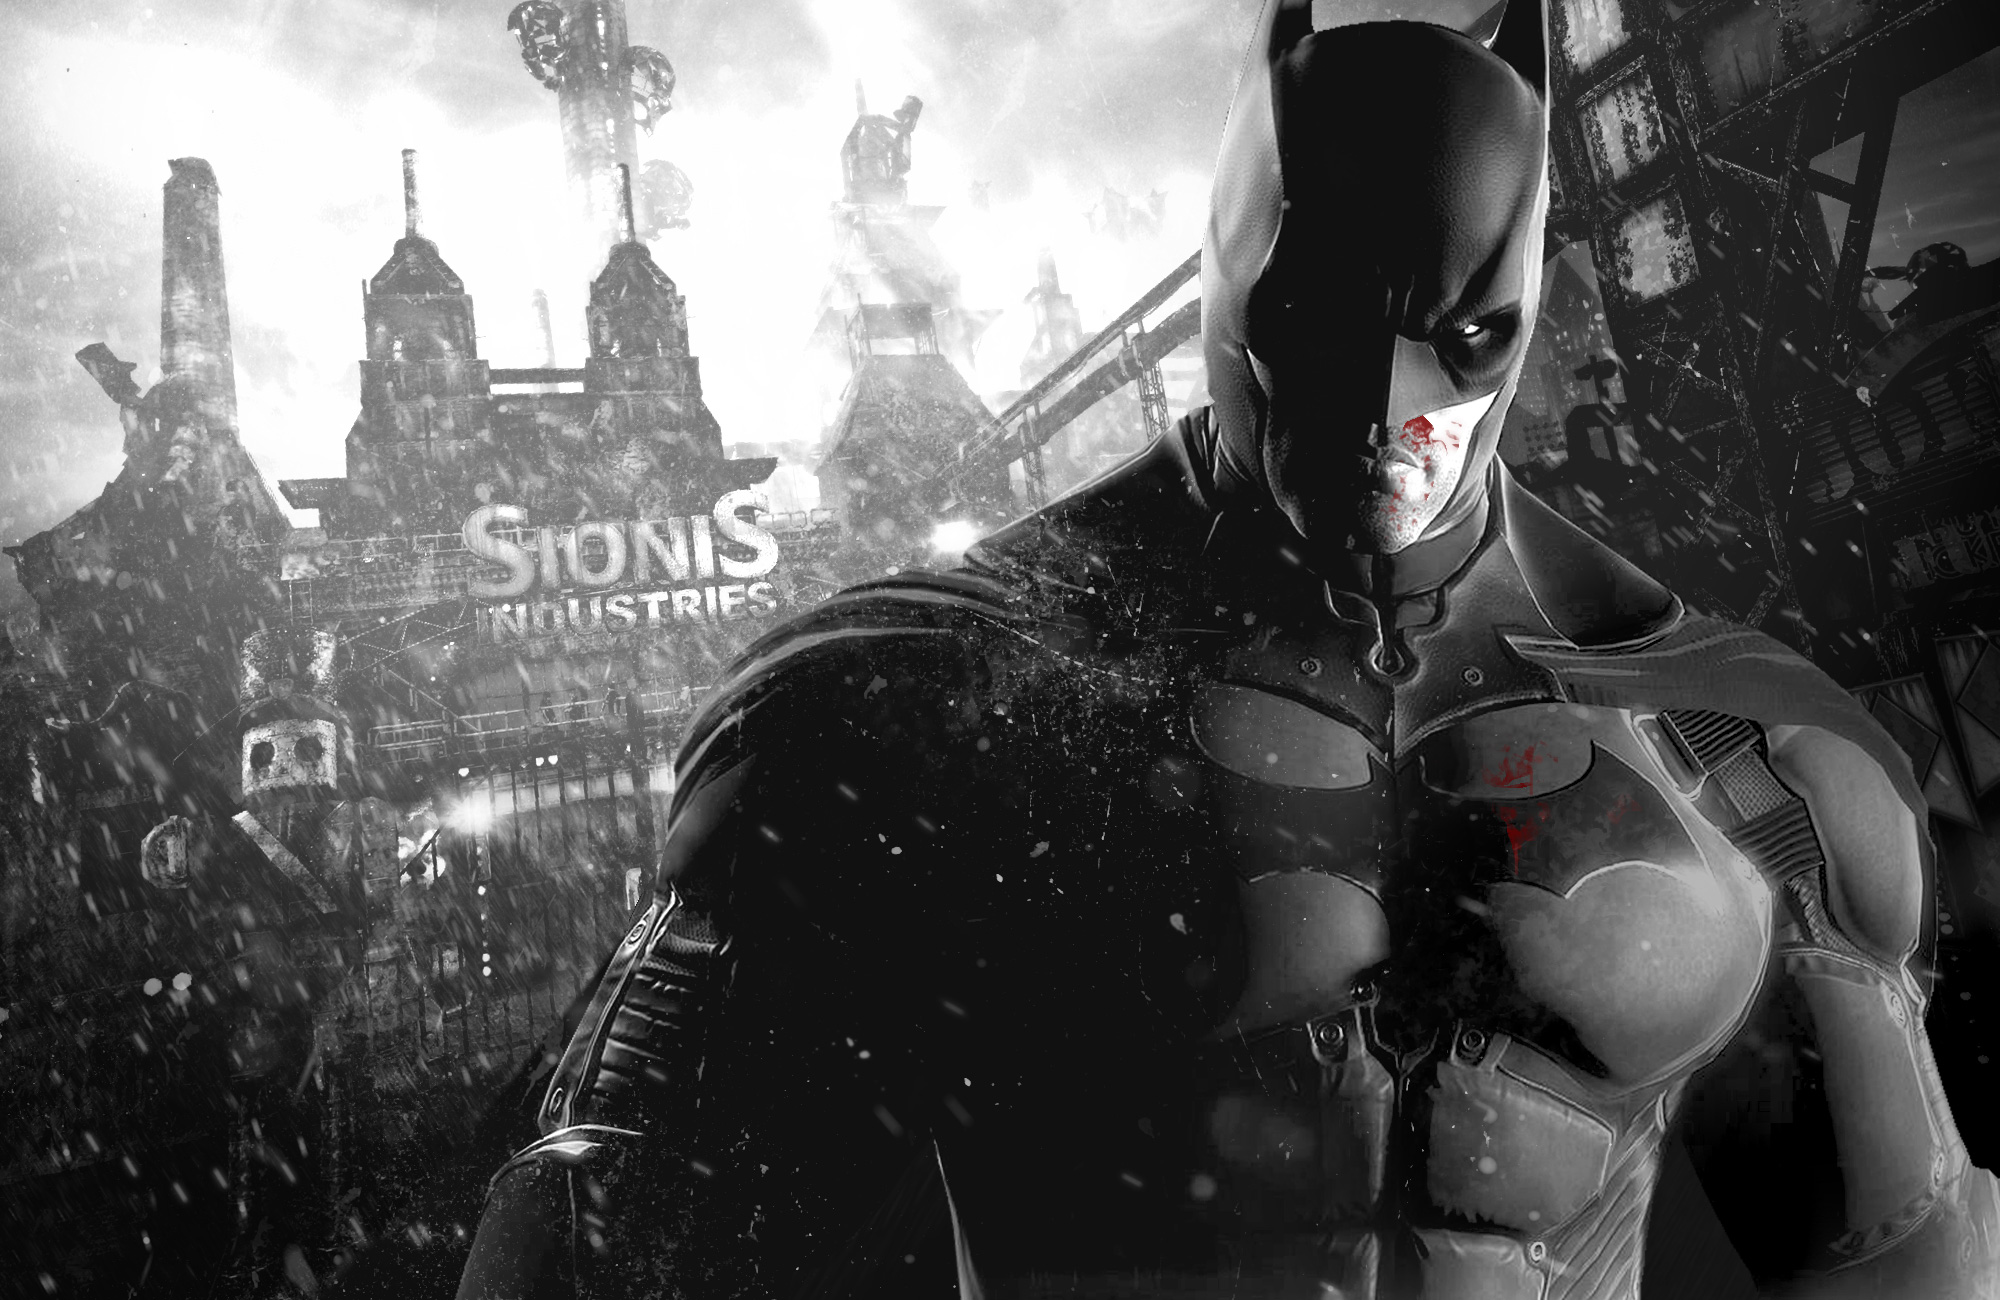 Batman Arkham Origins 4k Wallpaper,HD Games Wallpapers,4k Wallpapers,Images, Backgrounds,Photos and Pictures